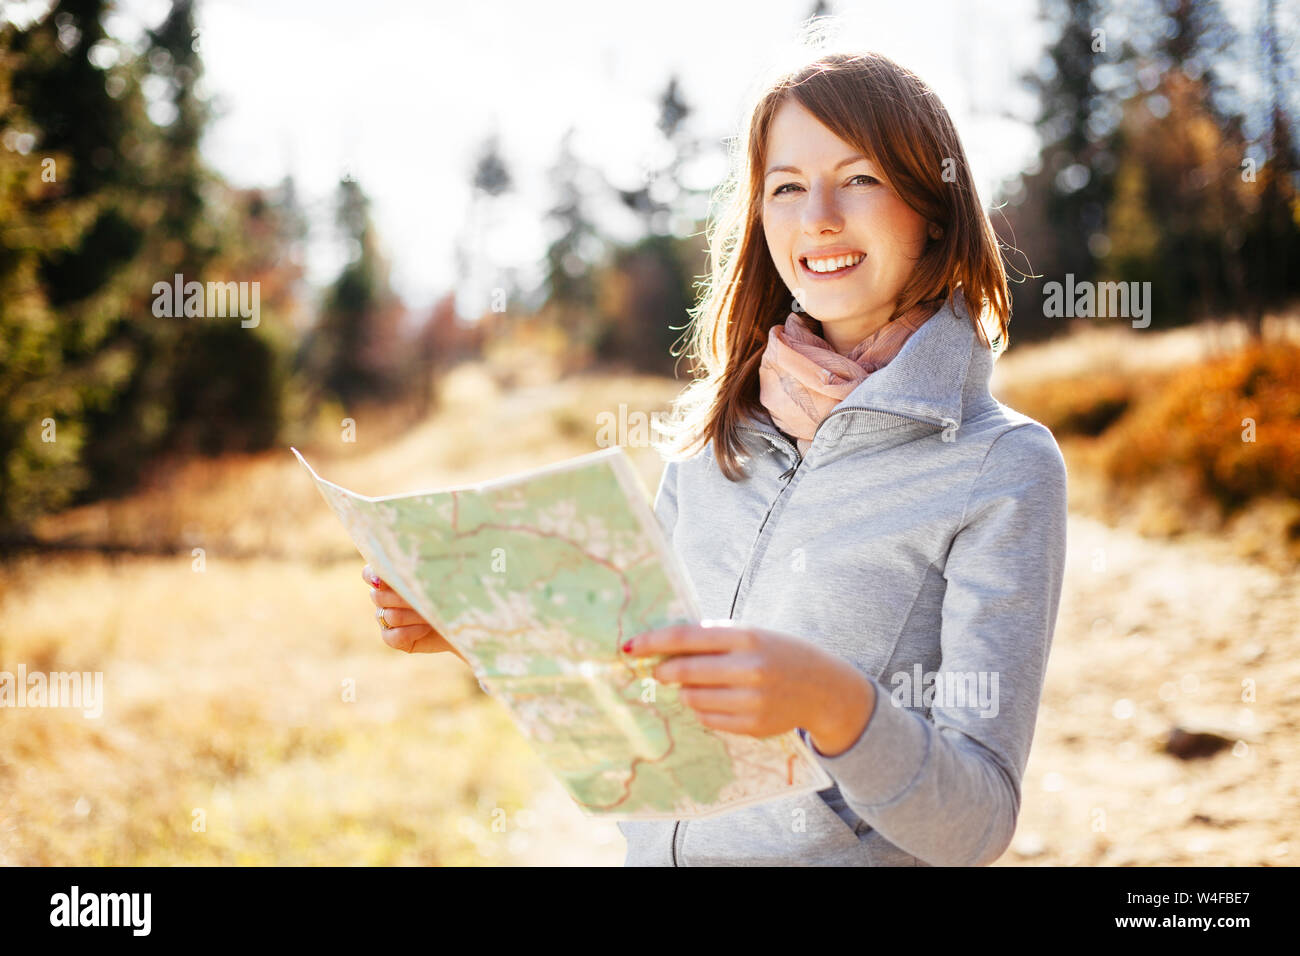 Happy woman reading map on trial during autumn in mountains Stock Photo